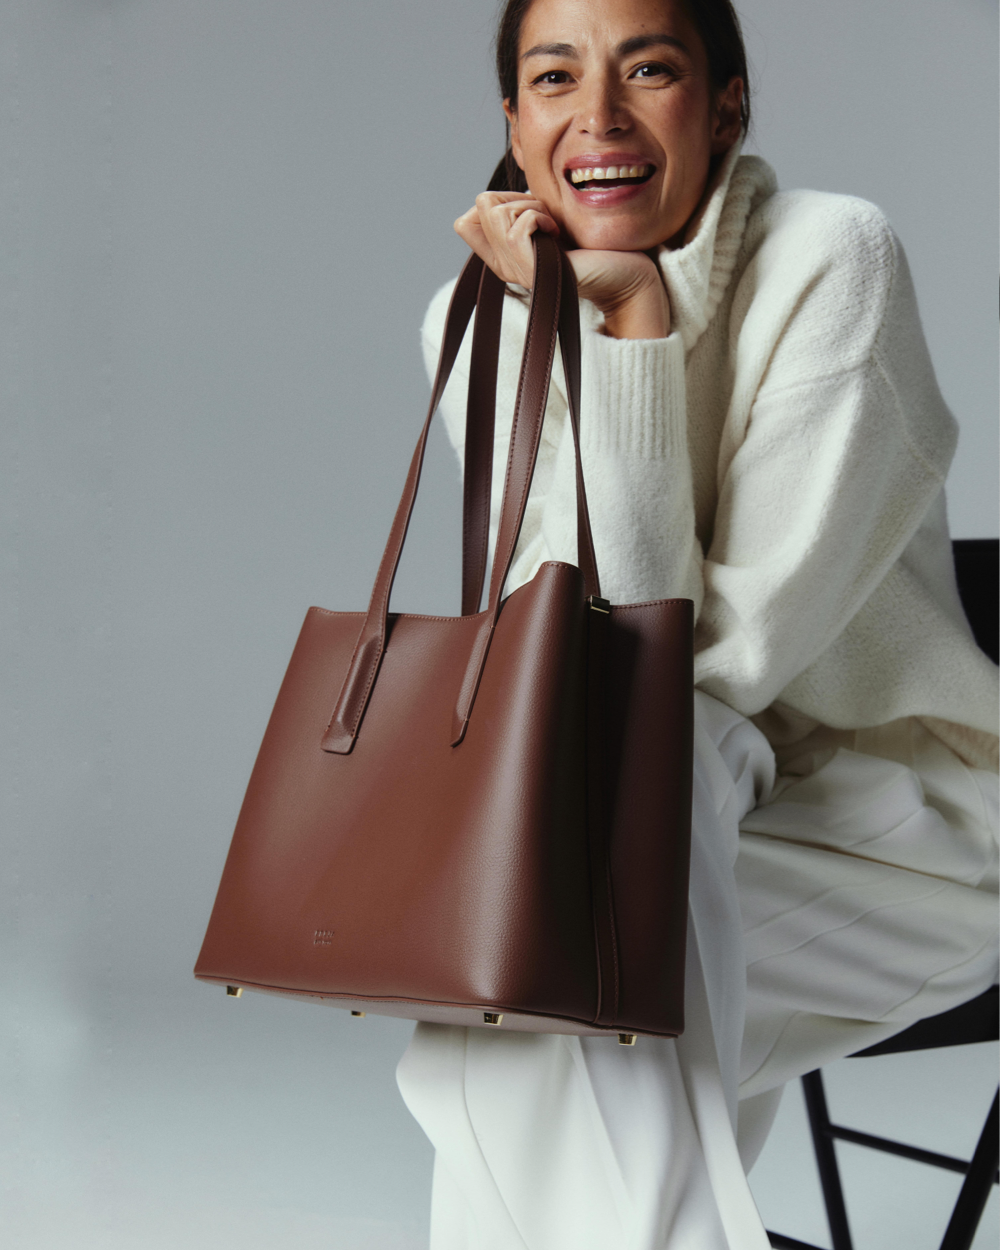 Vegan Leather Bags: The Next Big Travel Accessory?